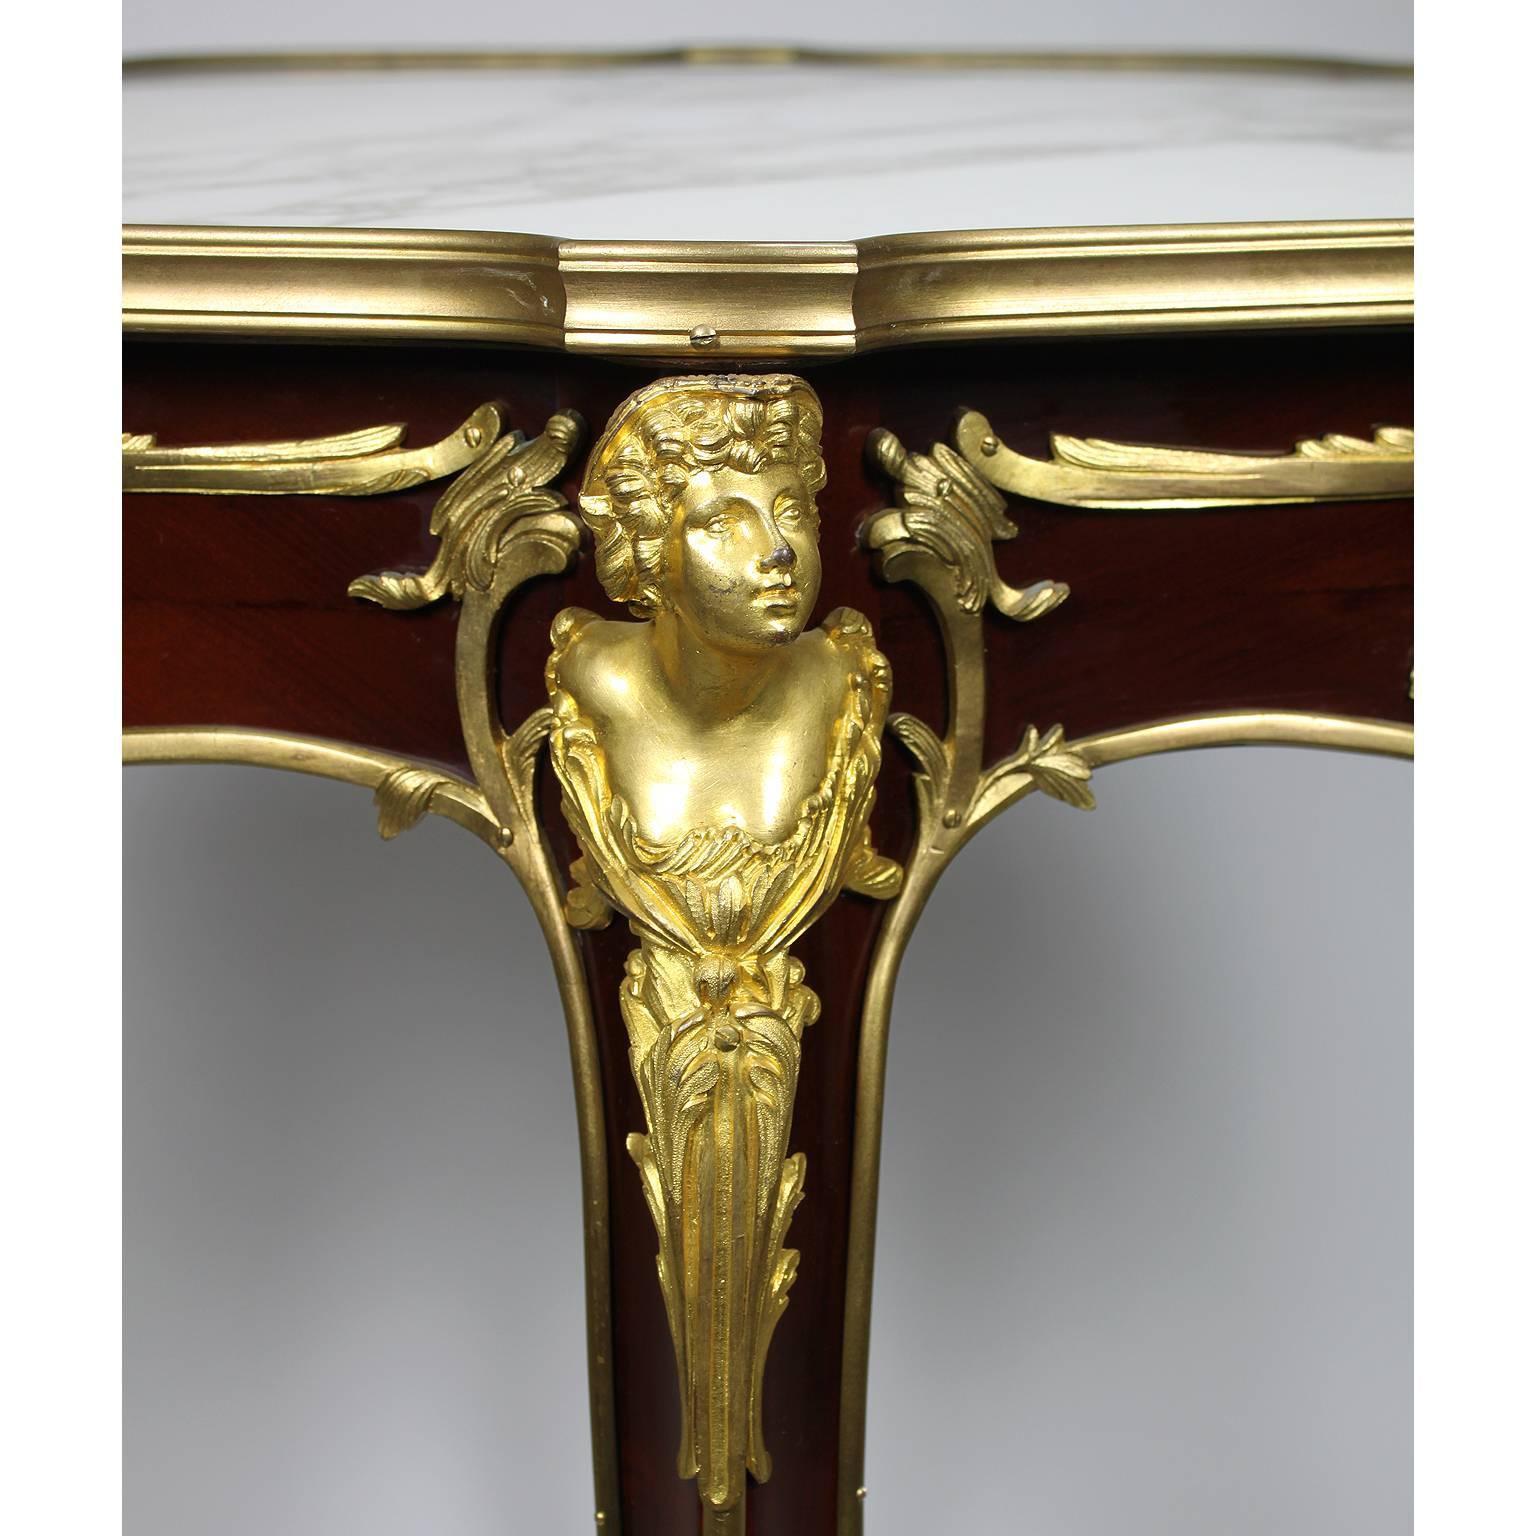 Carved Louis XV Style Figural Gilt-Bronze Mounted Guèridon Table, F. Linke Attributed